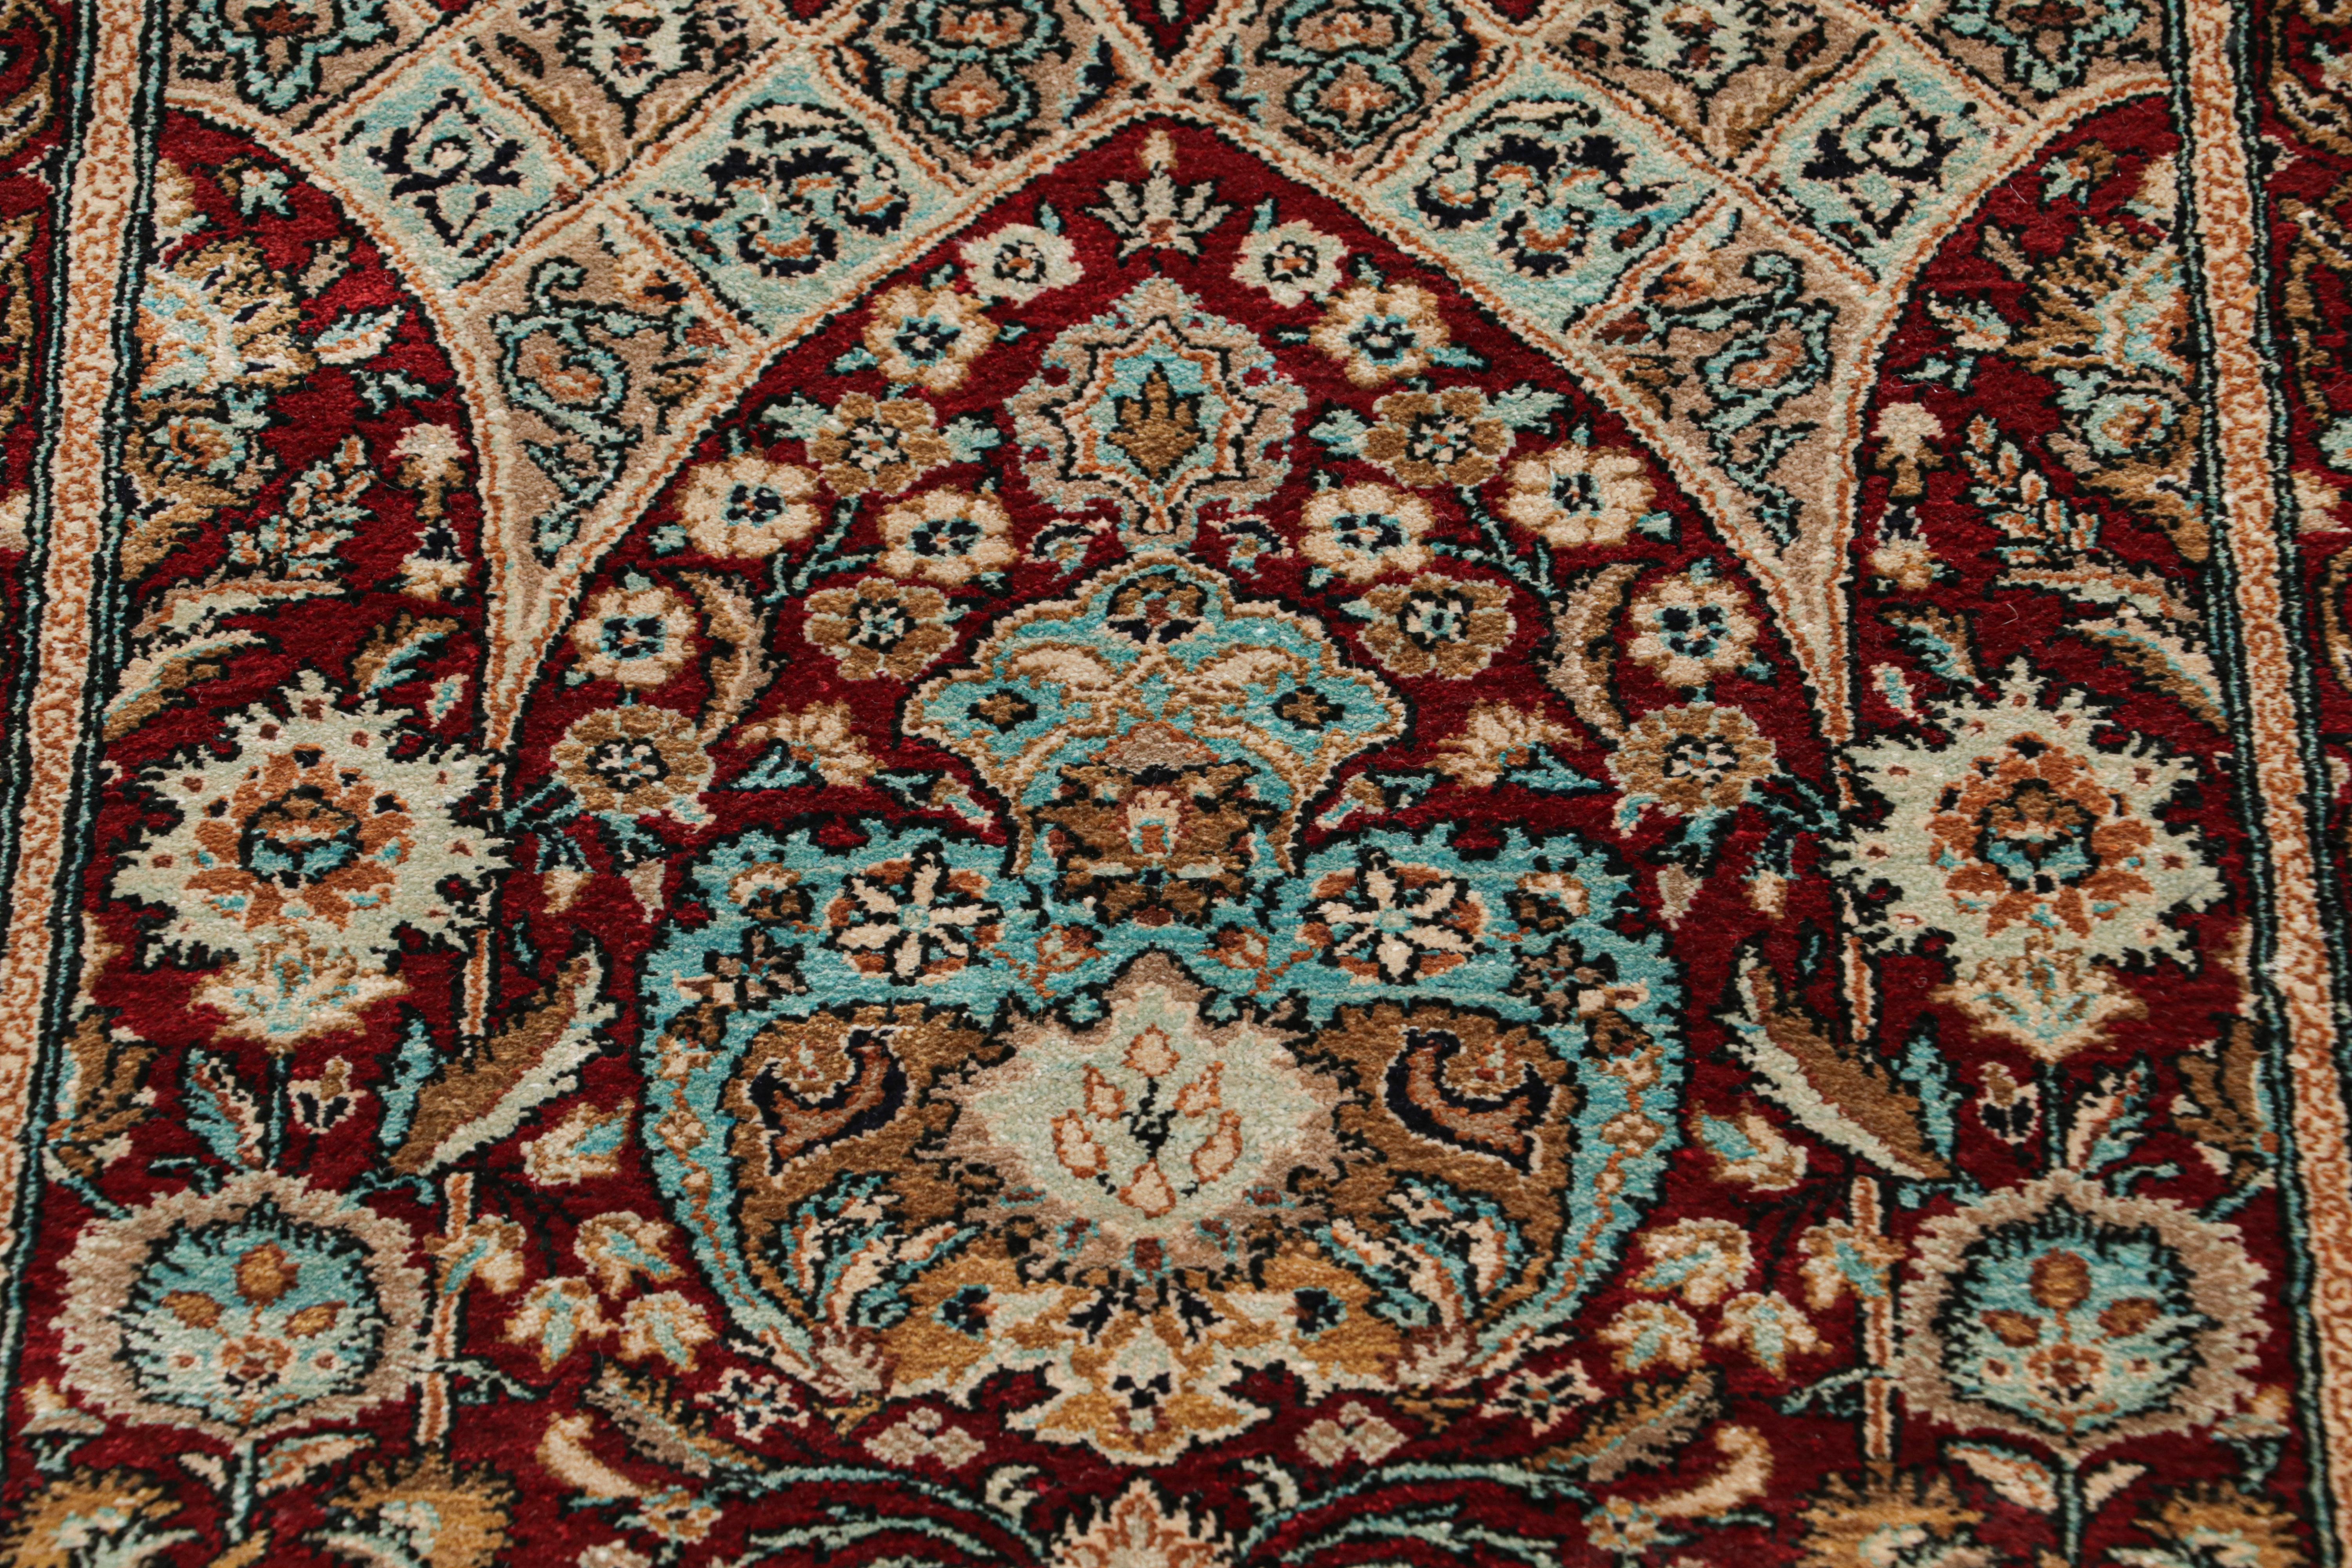 Hand-Woven Antique Persian Qum Rug in Burgundy With Floral Patterns, From Rug & Kilim For Sale